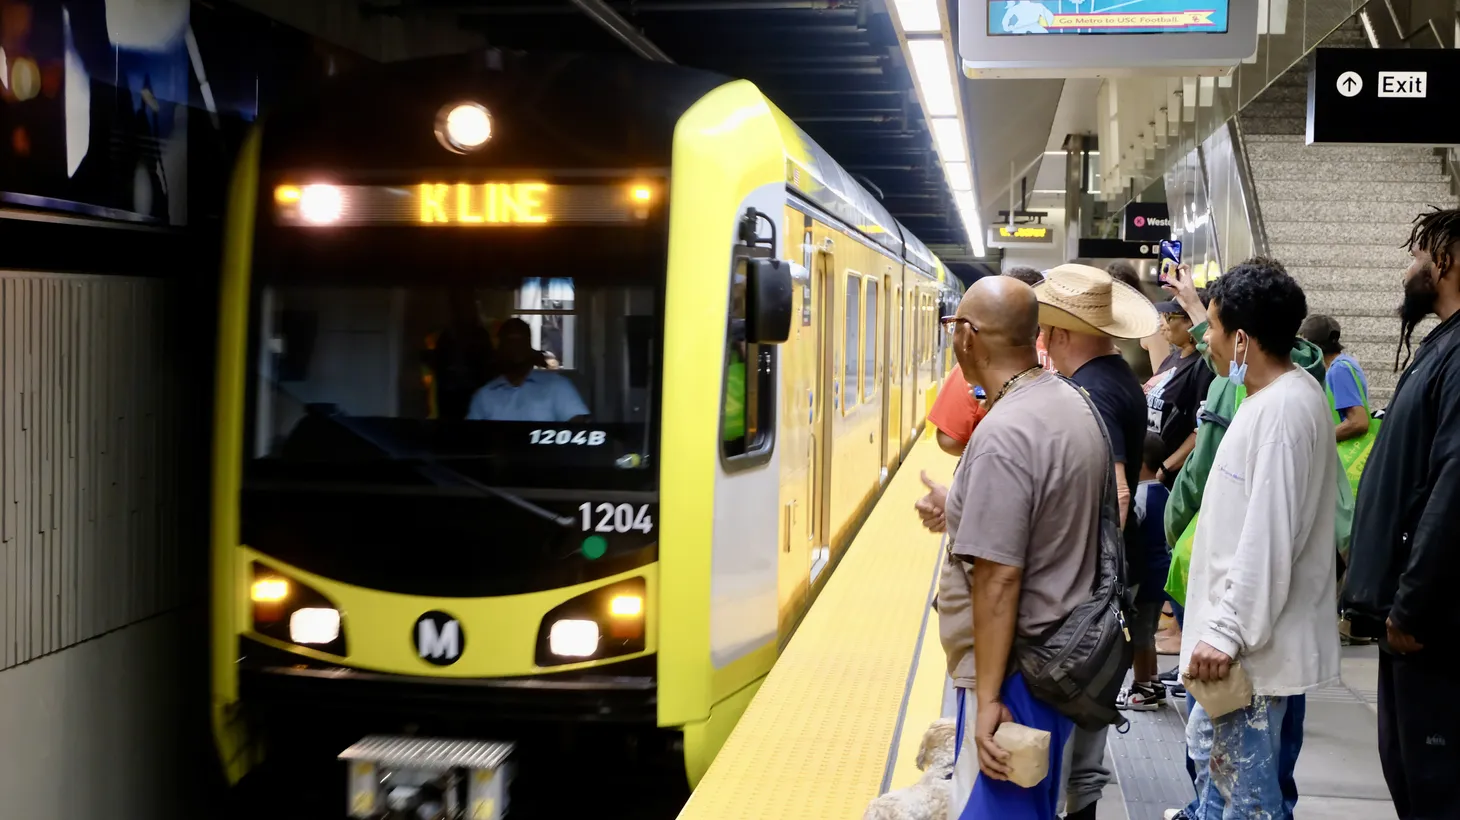 A K-Line trains arrives at the Leimert Park station during its opening weekend.